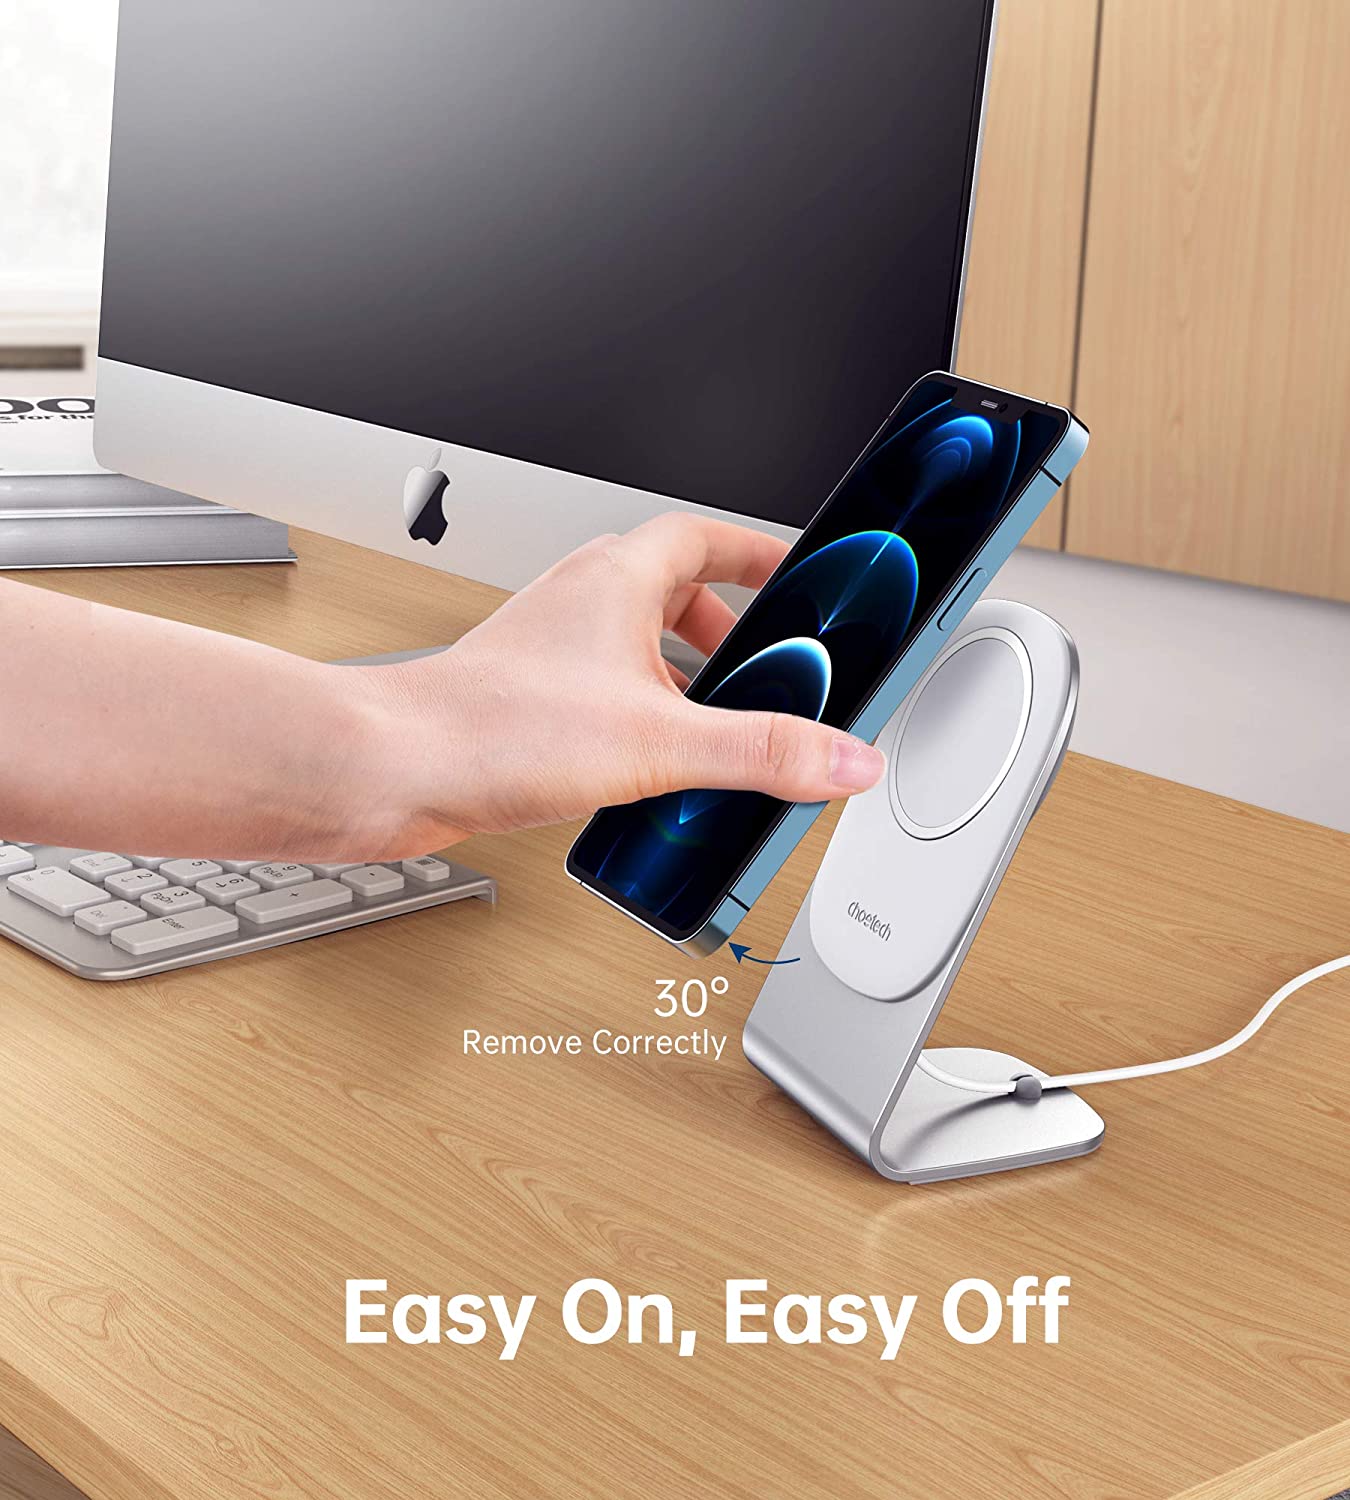 CHOETECH Choetech Phone Stand For MagSafe Charger (Holder Only, MagSafe Charger not included)